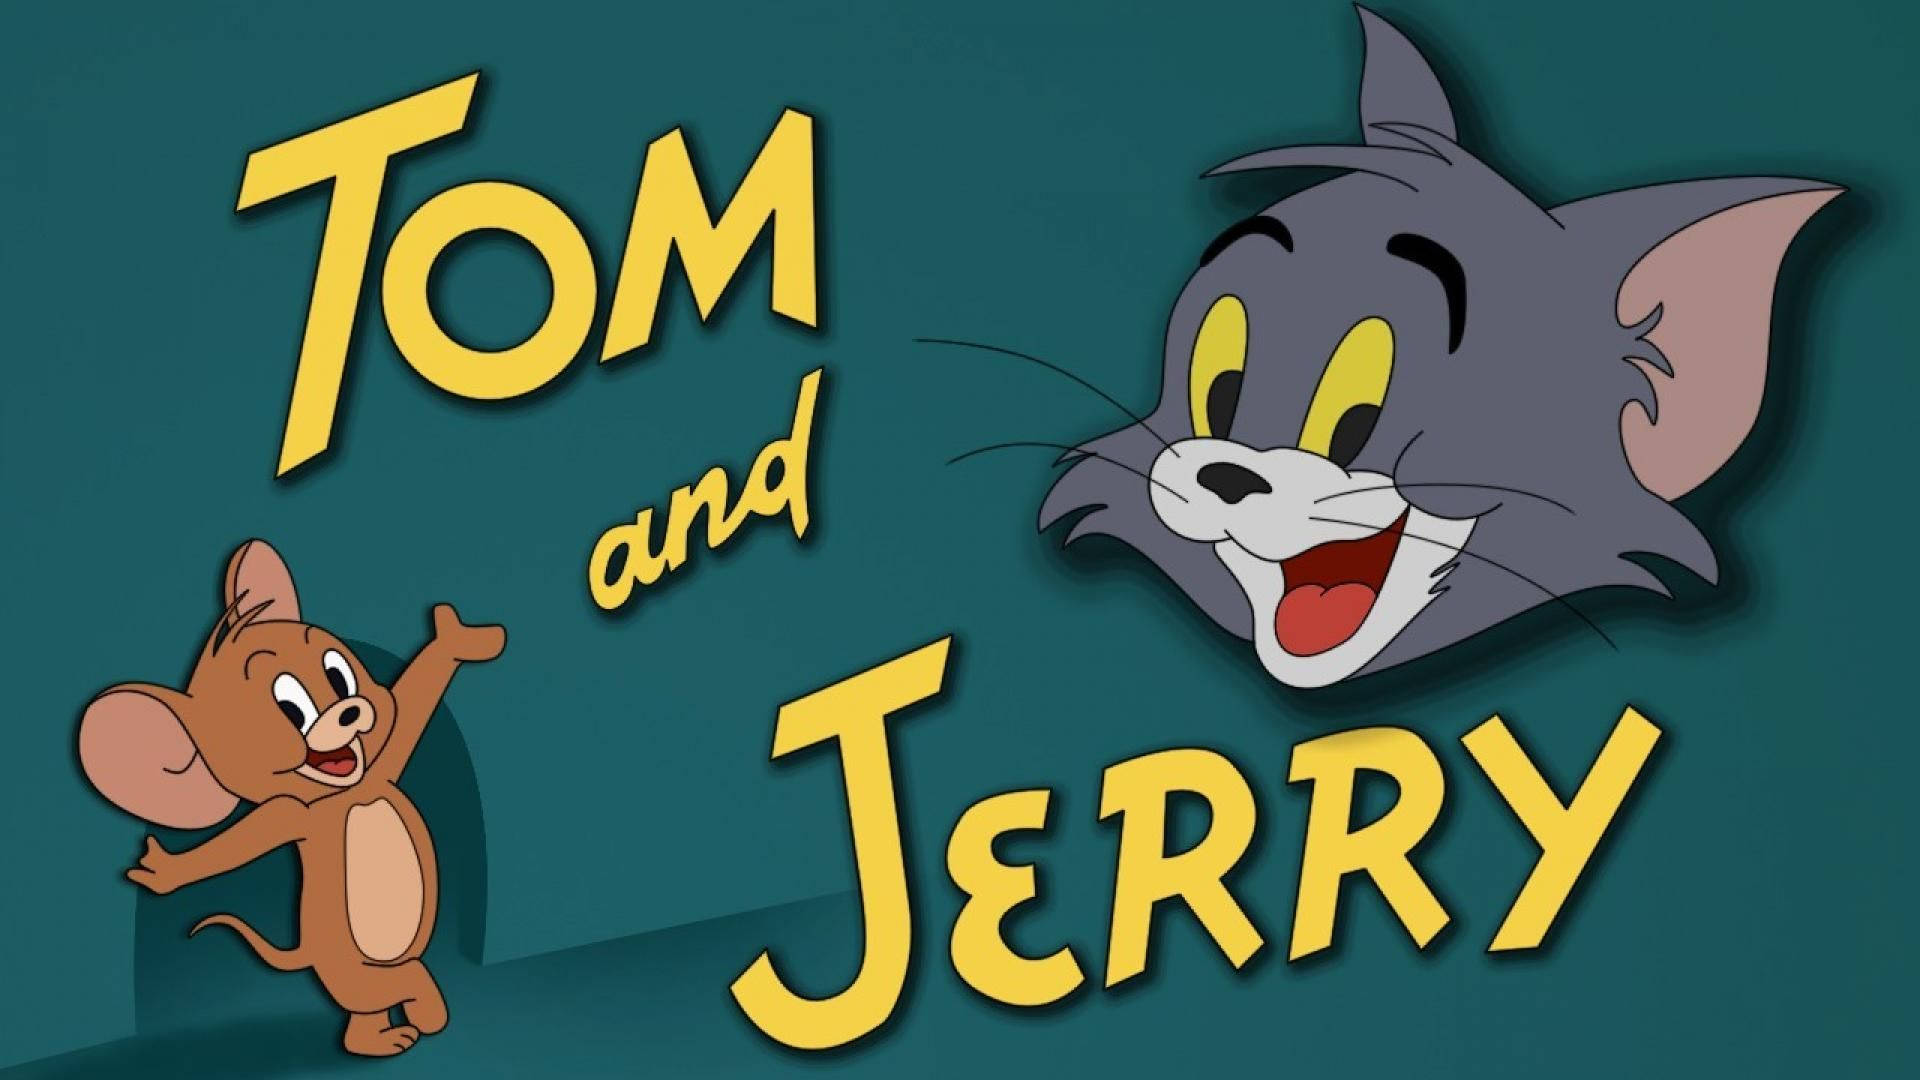 Tom Cat With Little Mouse Jerry Background